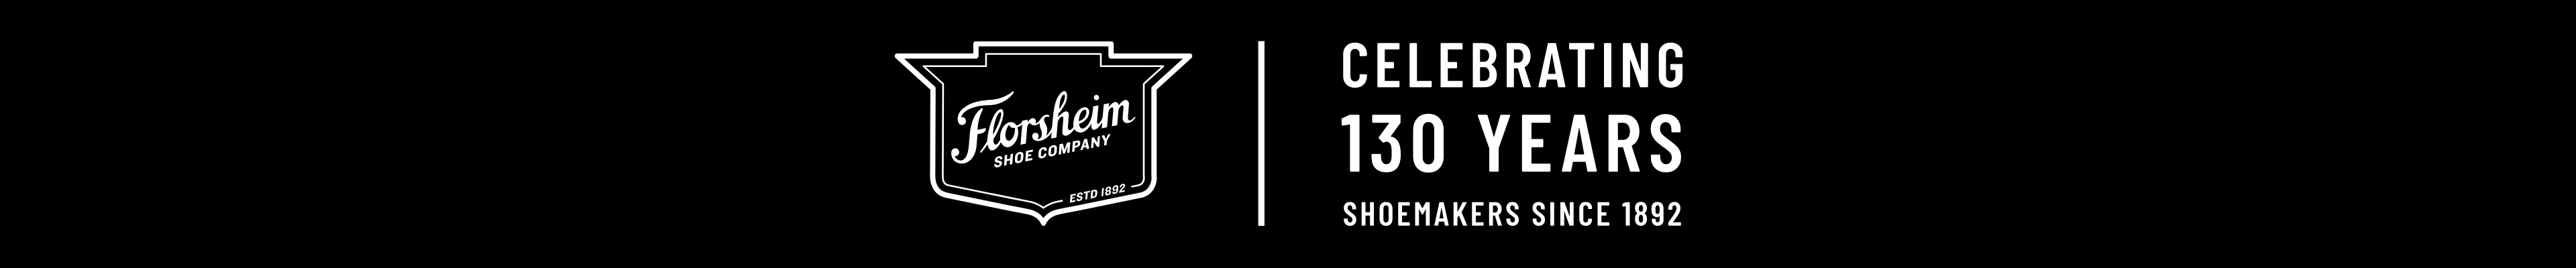 Celebrating 130 years. Shoe makers since 1892.